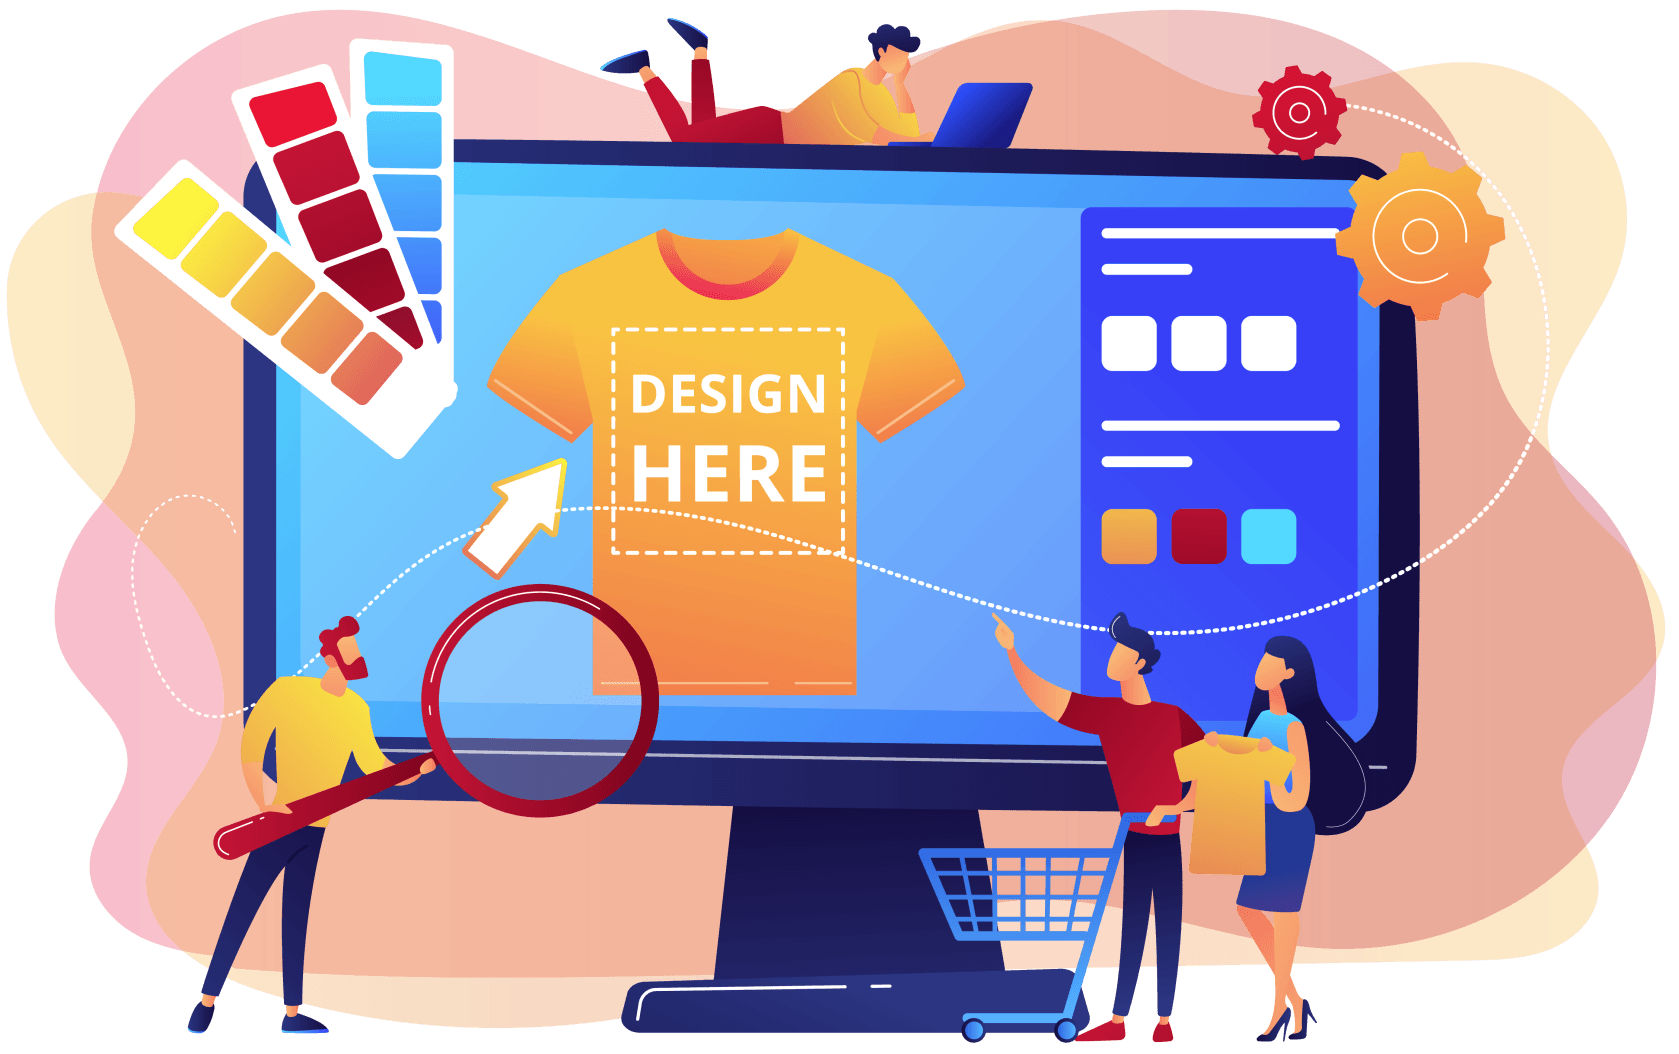 T-shirt print on demand services. Promotional apparel design. Merch clothing, custom merchandise products, merch design service concept. Bright vibrant violet vector isolated illustration